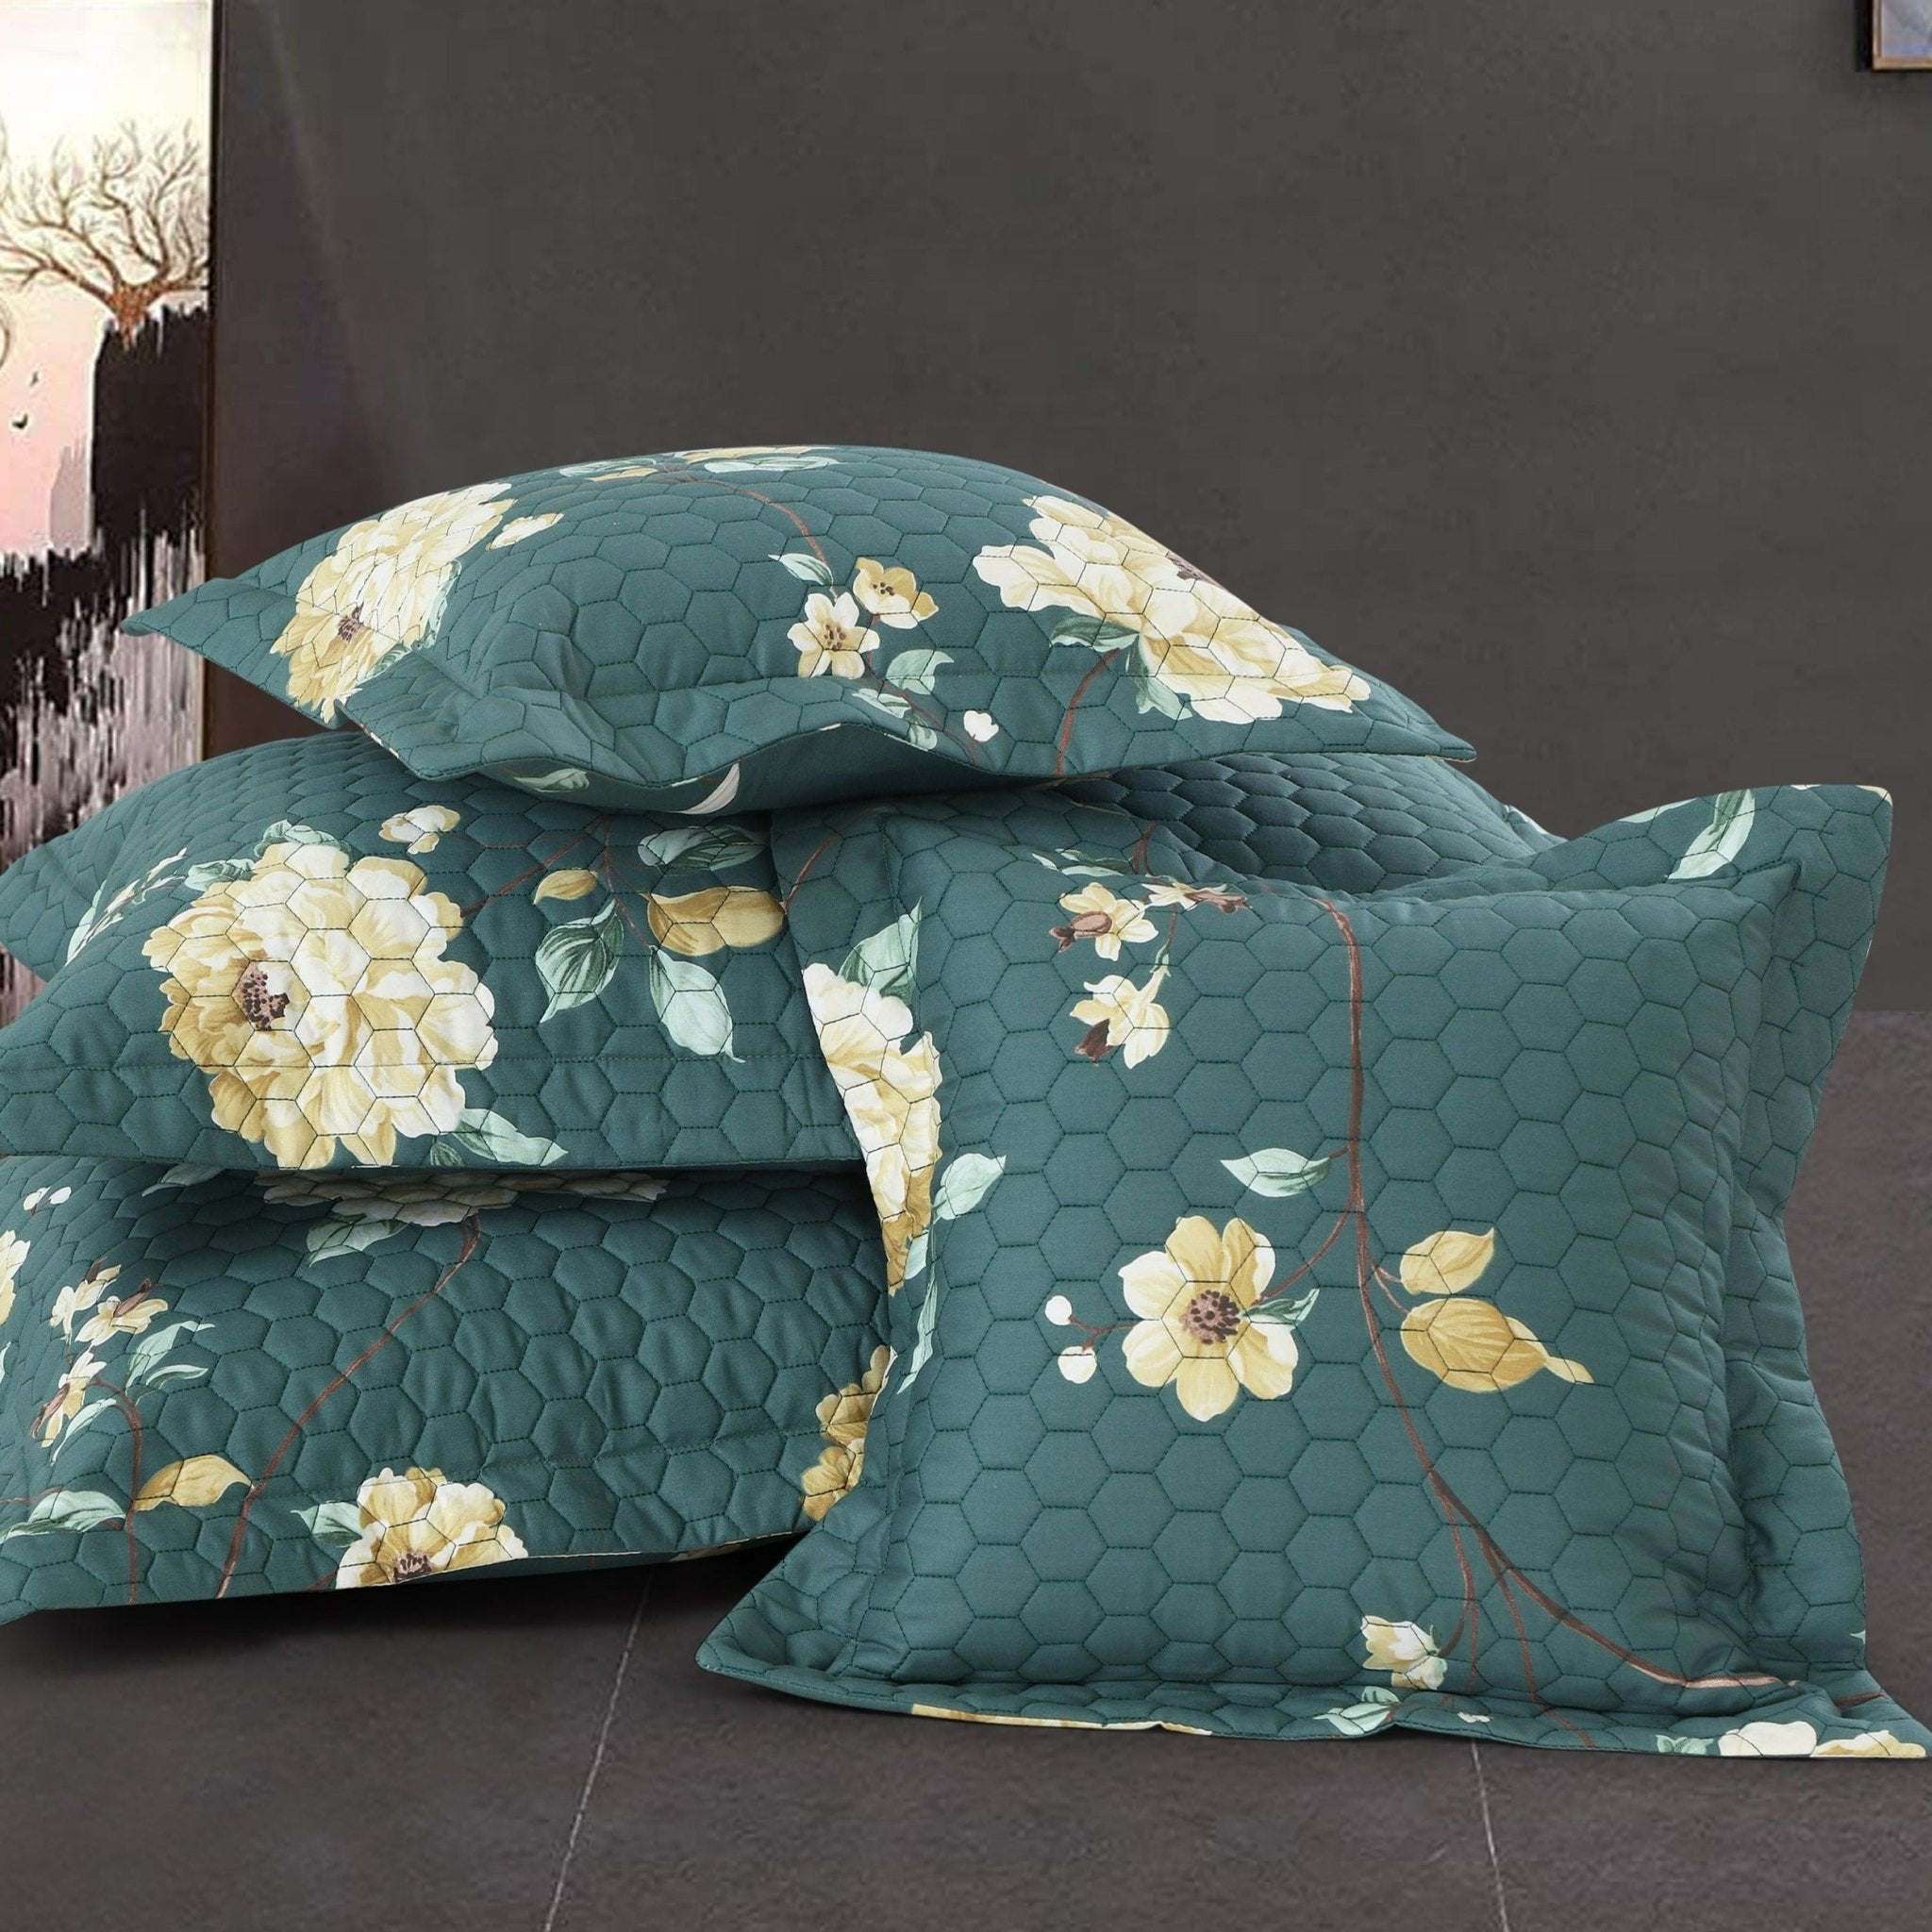 Malako Royale Quilted Bed Cover - Green Floral 100% Cotton King Size Bedspread - MALAKO